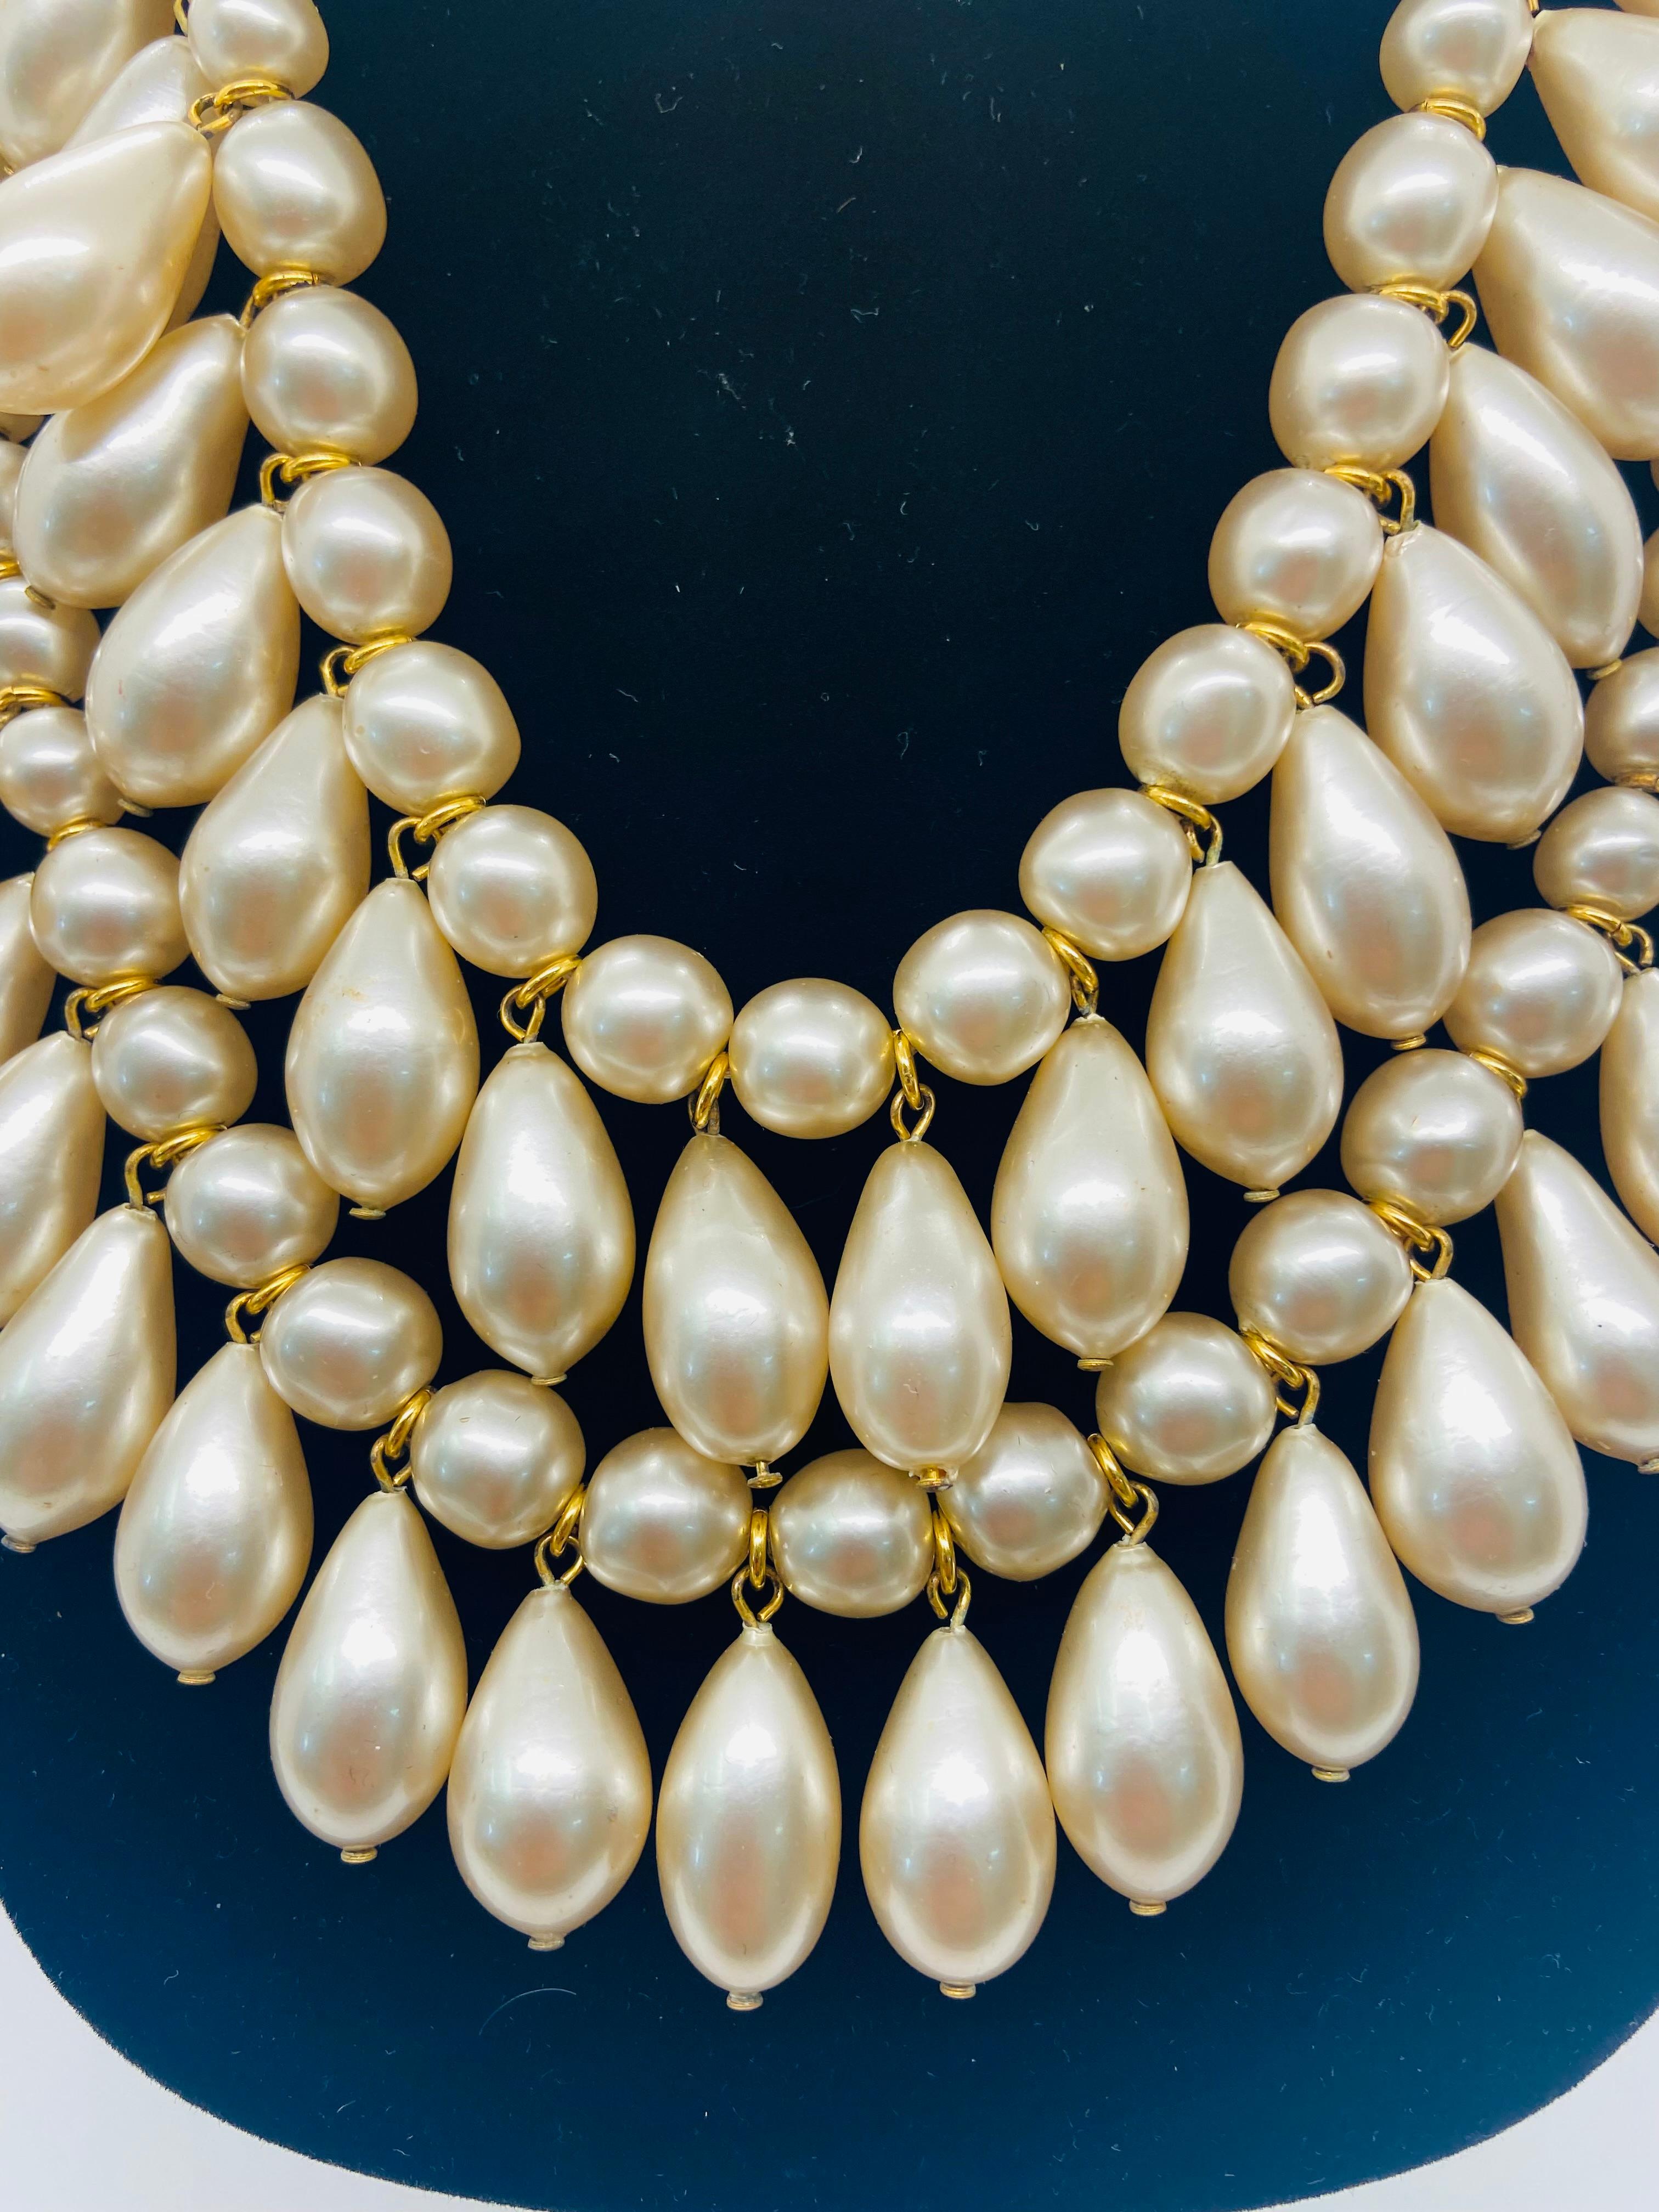 A rare and gorgeous vintage Chanel faux pearl four strand necklace. The statement necklace is made of round and drop shaped faux pearls and is marked made in France chanel on the clasp with the chanel logo. 
This statement multi-strand necklace will